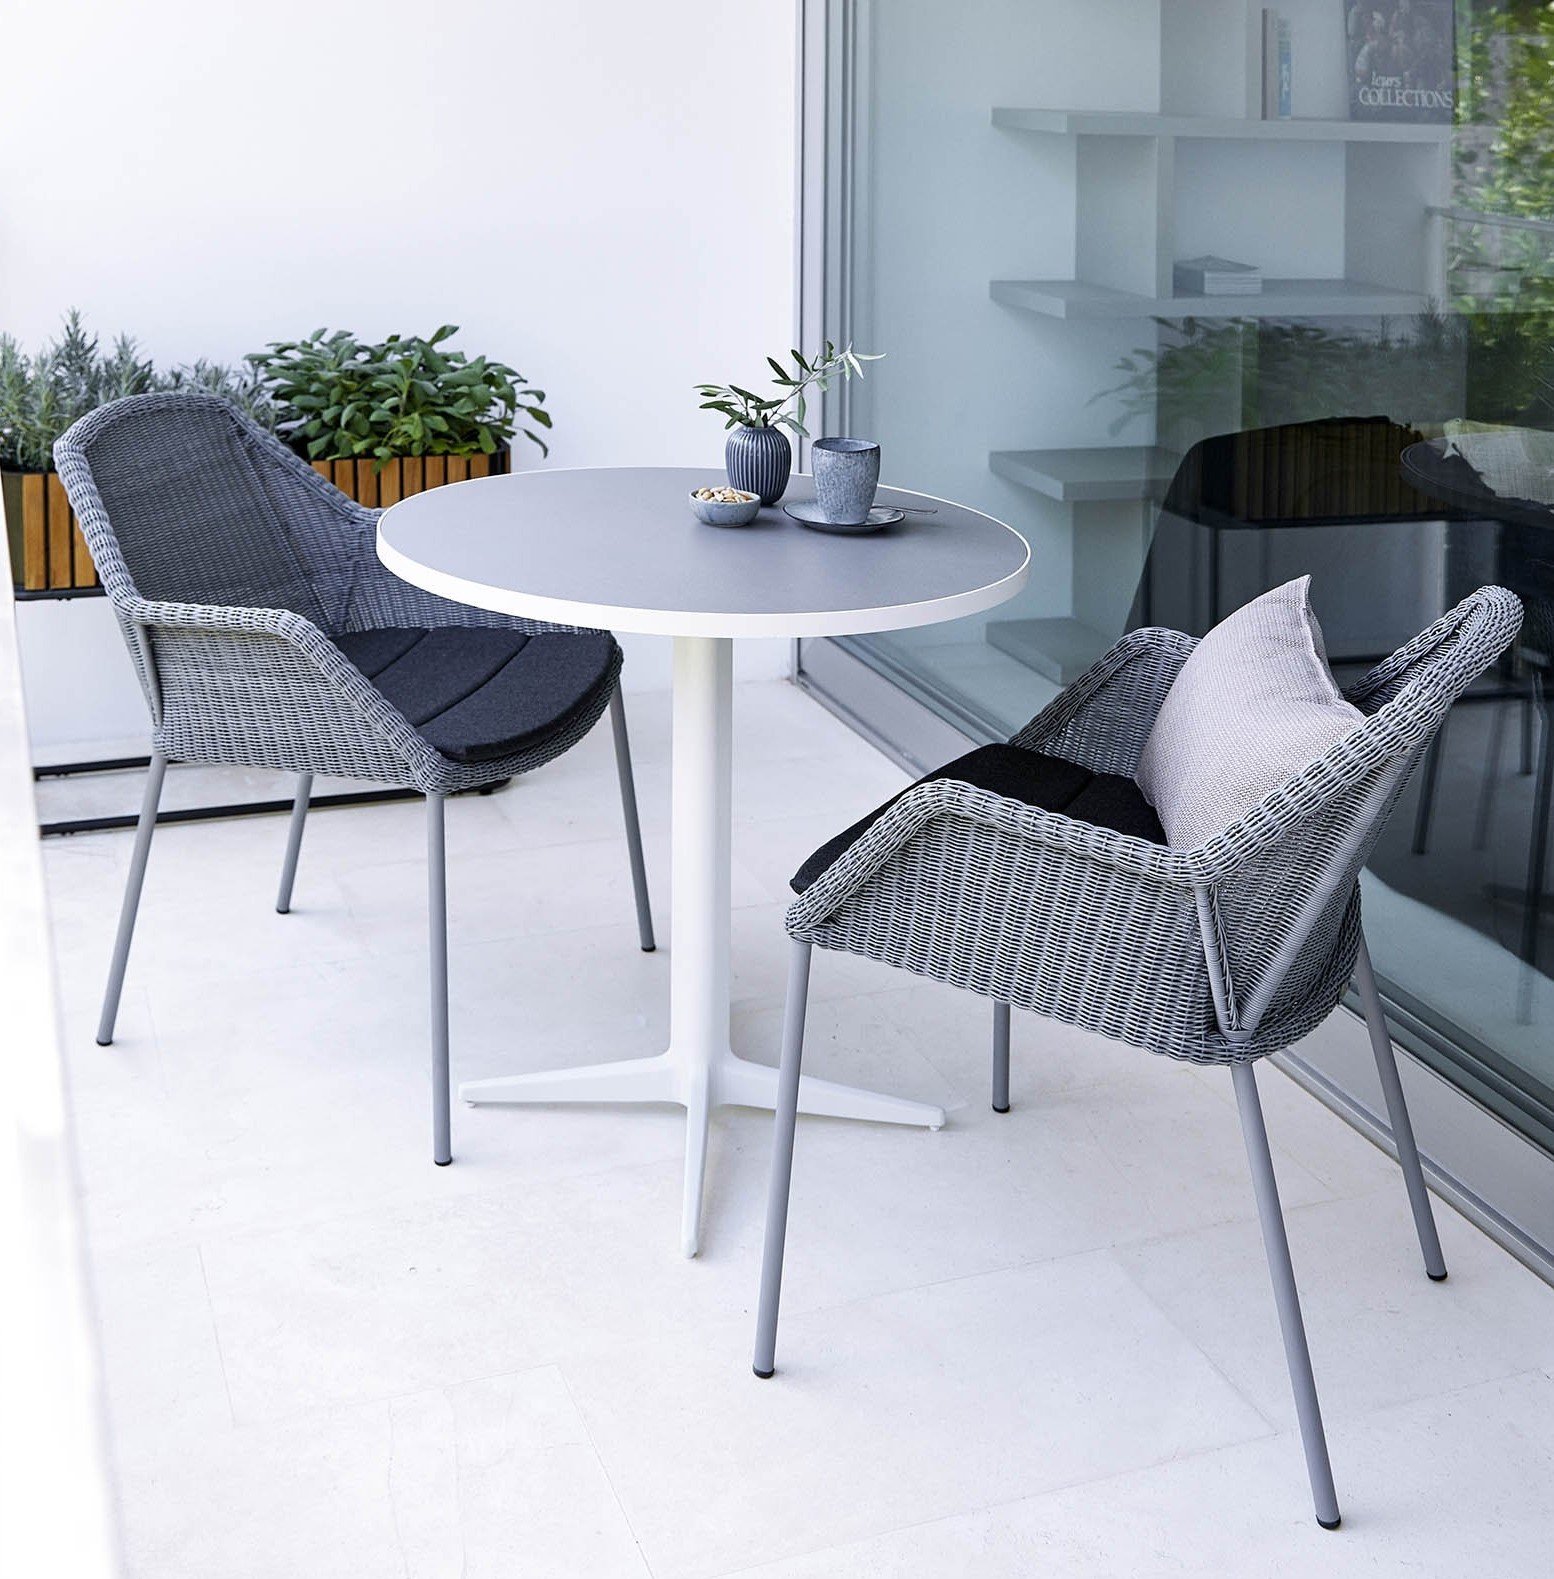 Breeze Dining Chair from Cane-line, designed by Strand+Hvass